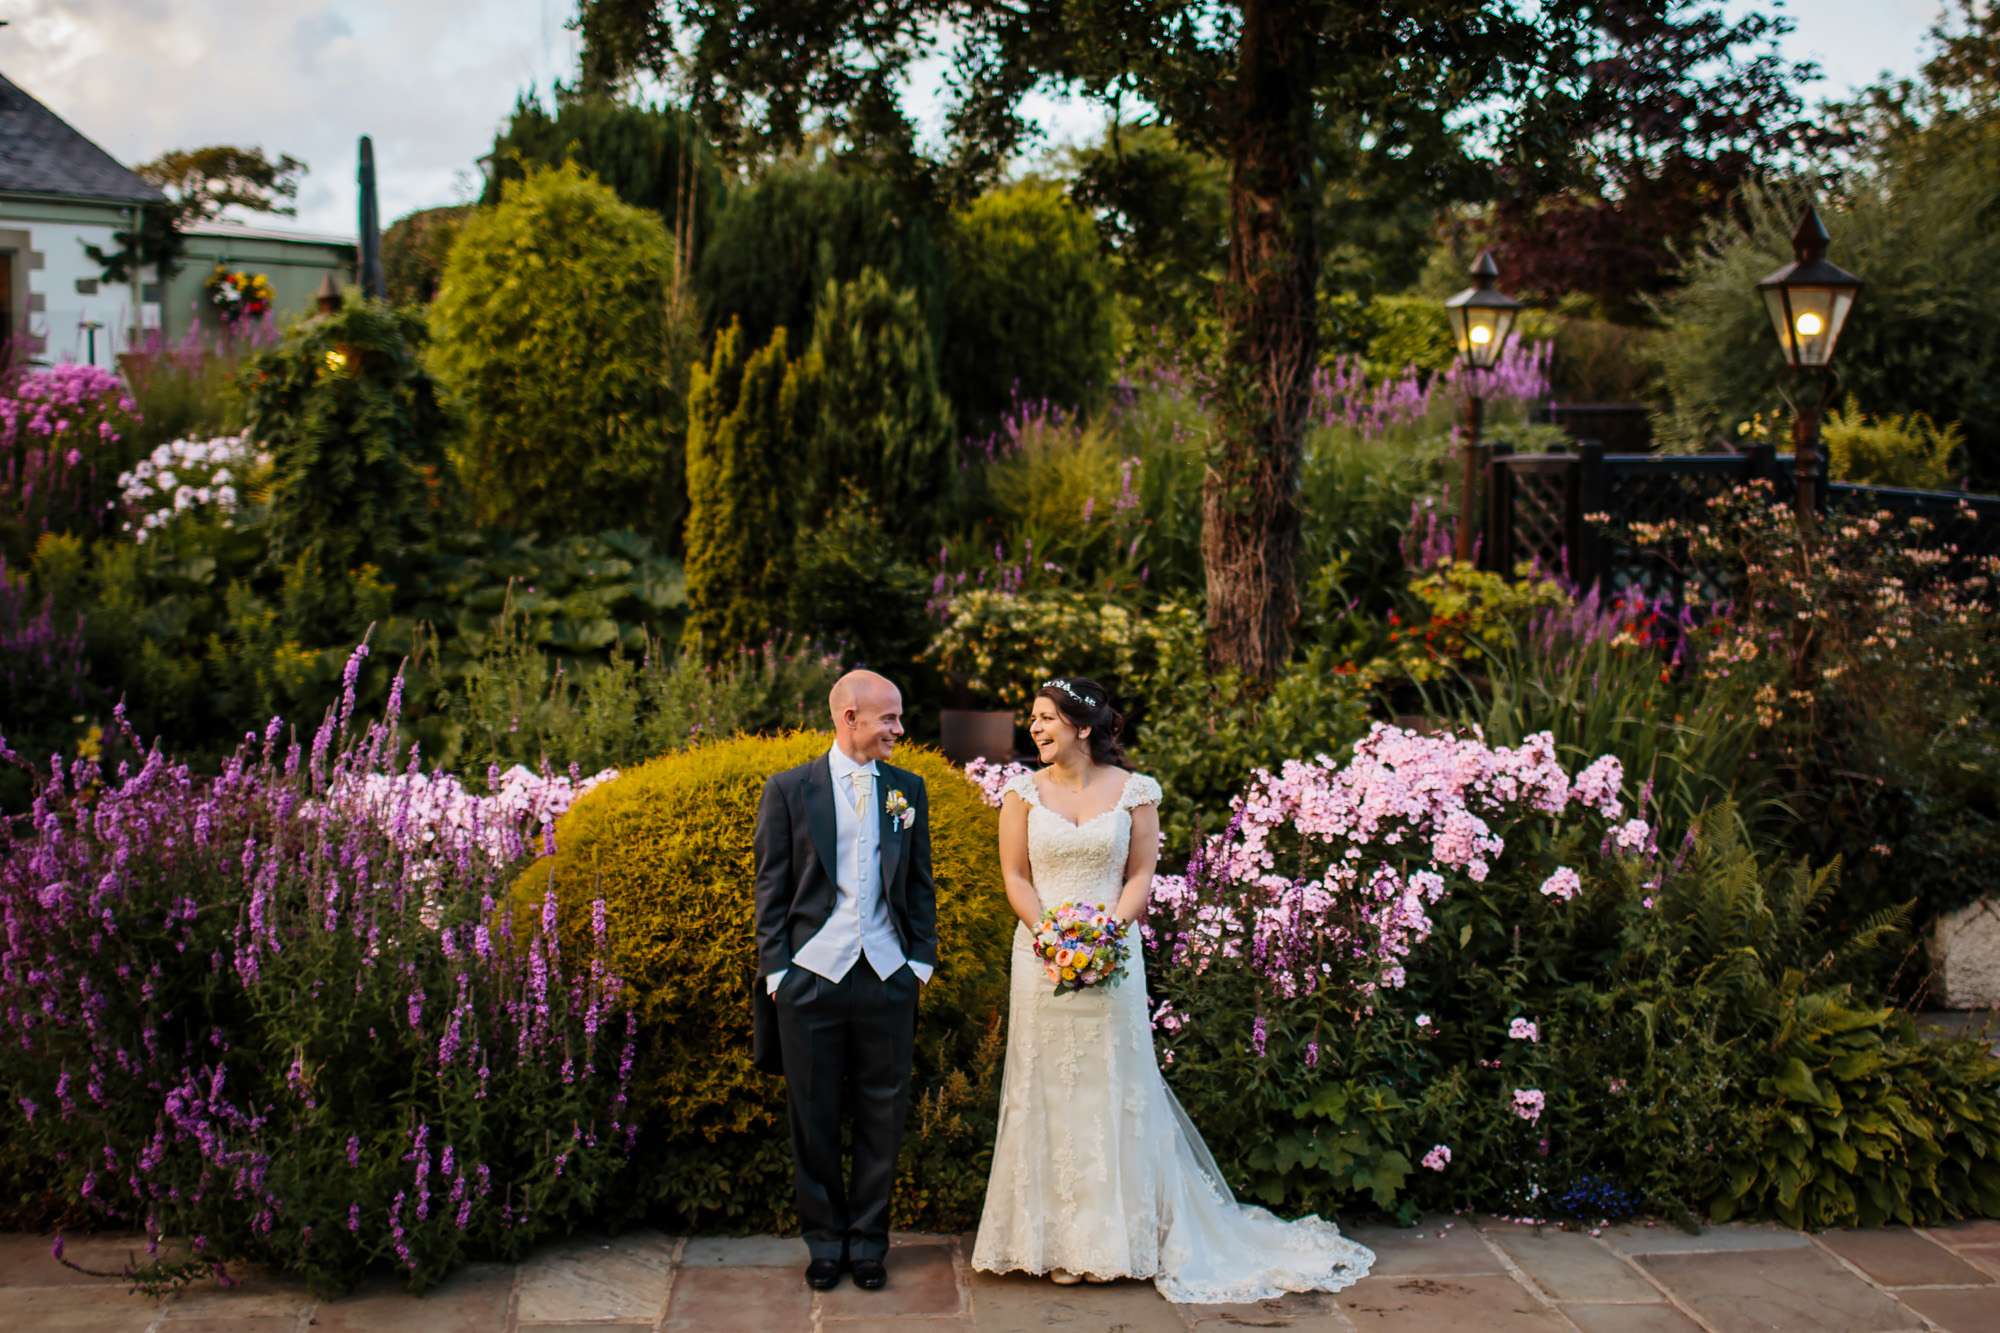 Bride and groom laughing in front of a flower bed in Yorkshire